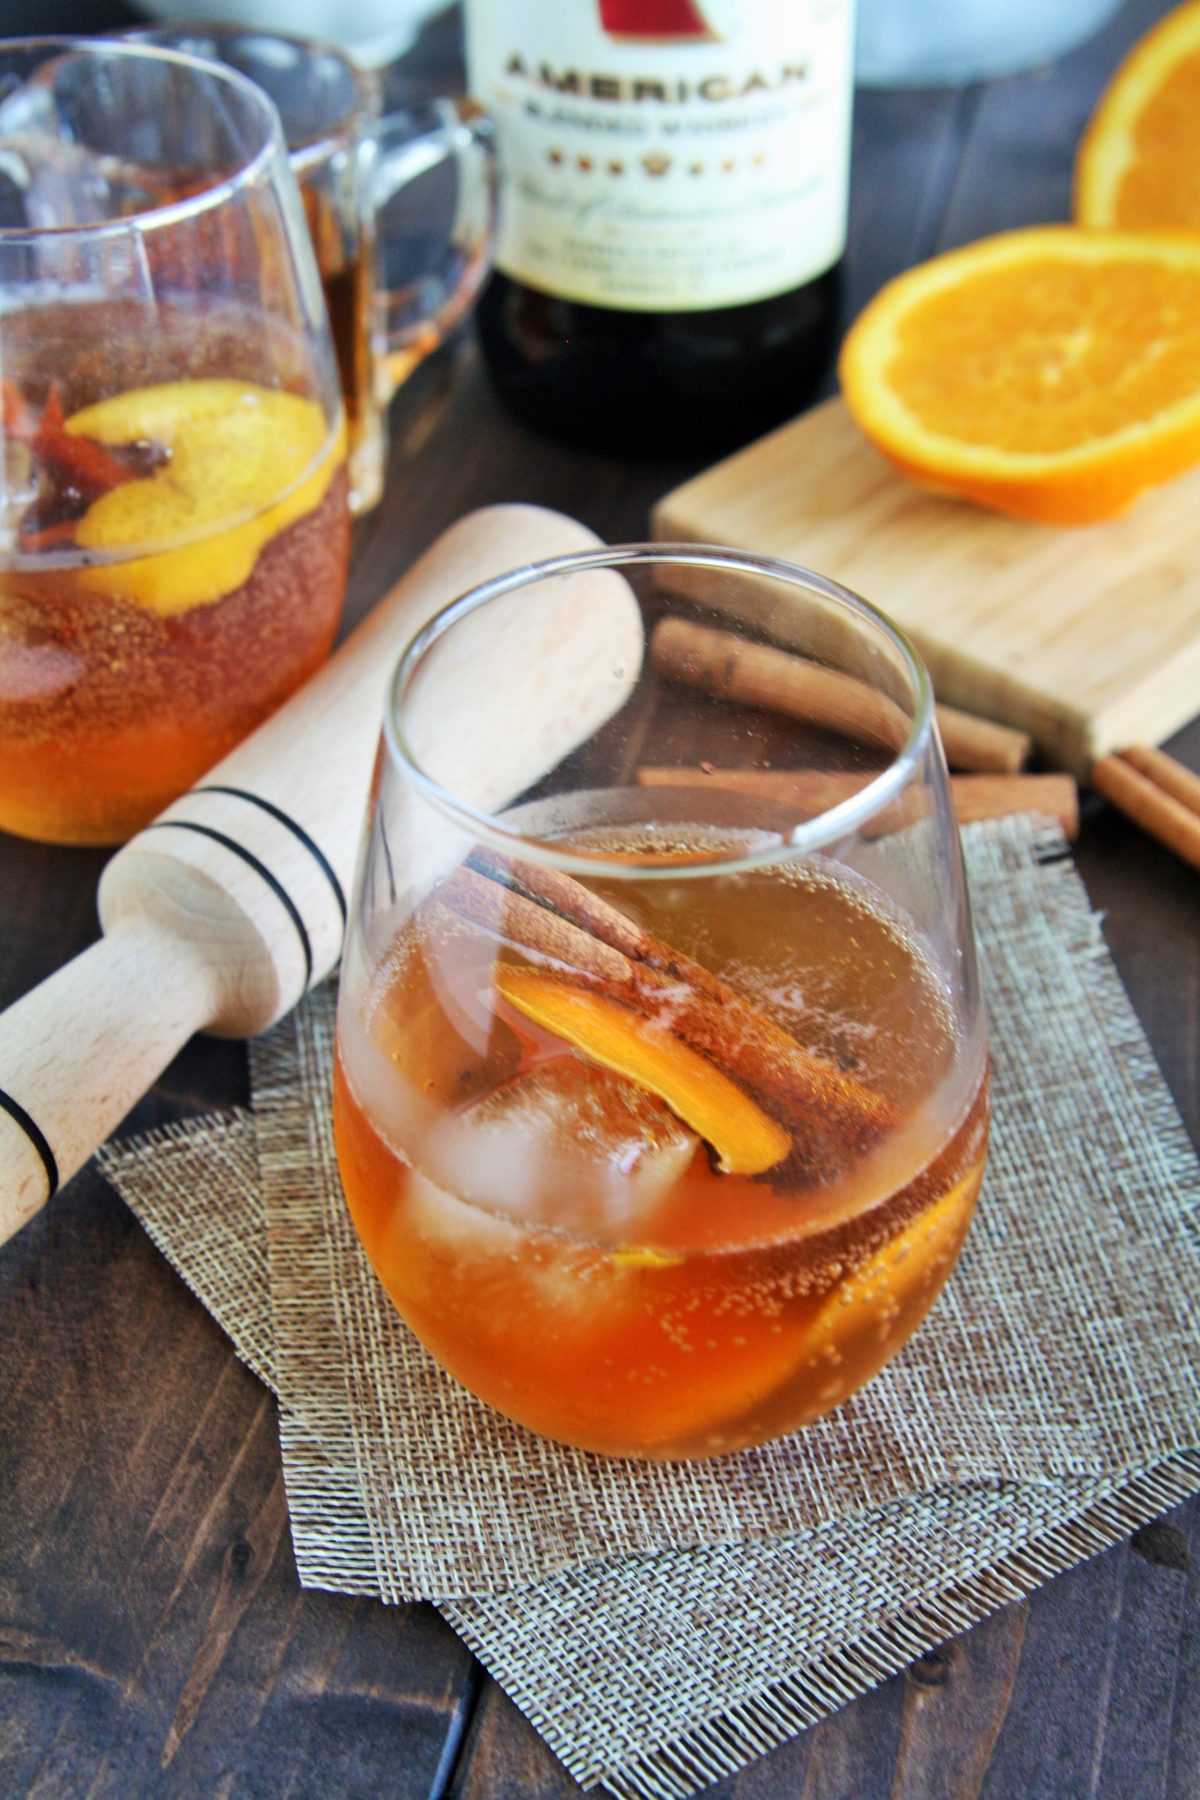 Maple Old Fashioned is a new spin on an old classic cocktail, with maple syrup and cinnamon for a Fall flavor.